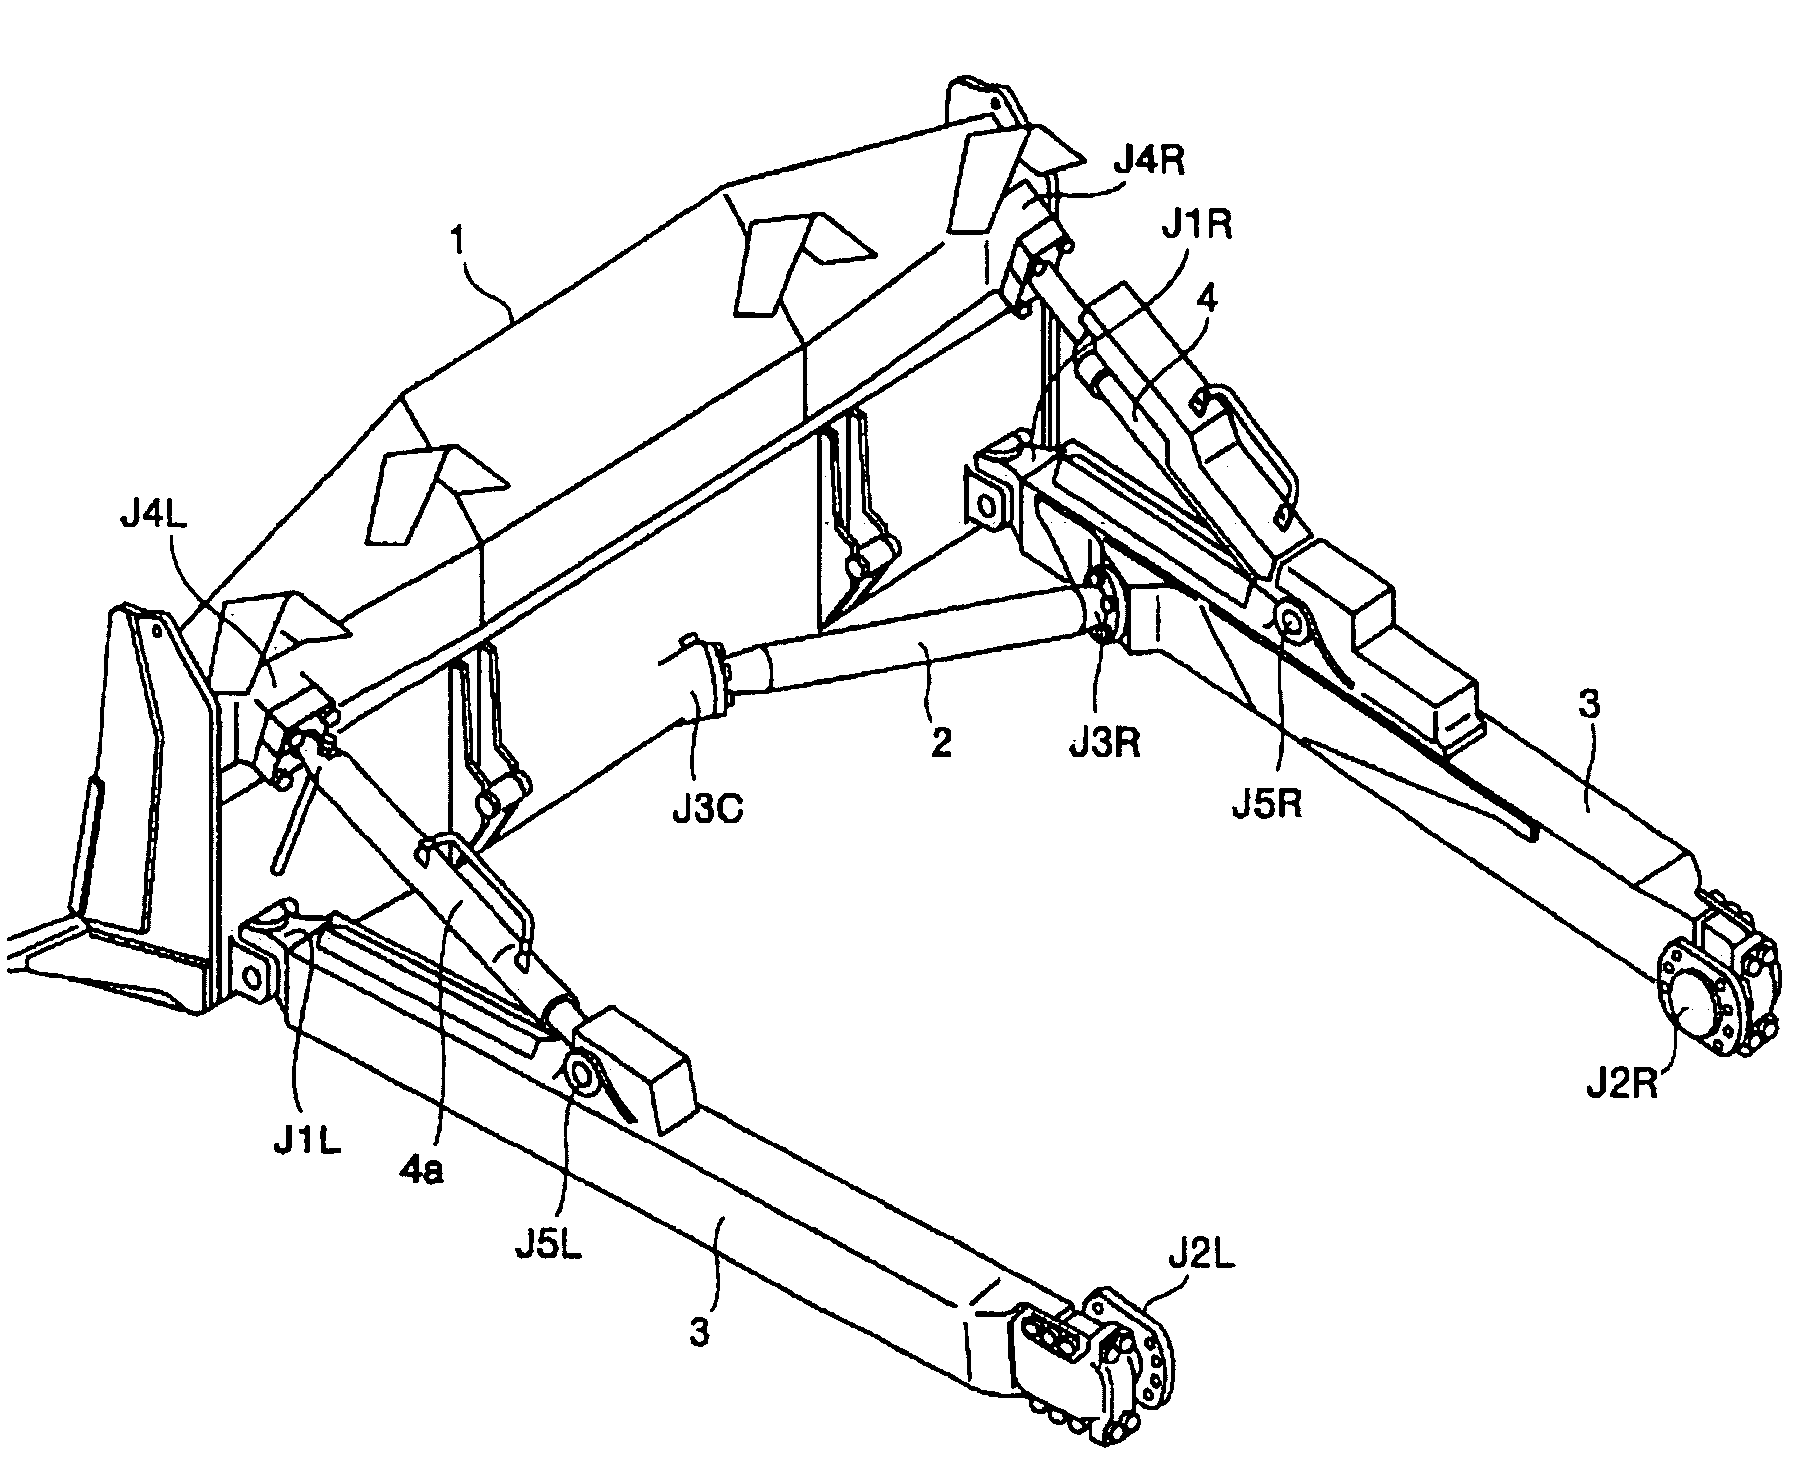 Blade mounting structure of bulldozer